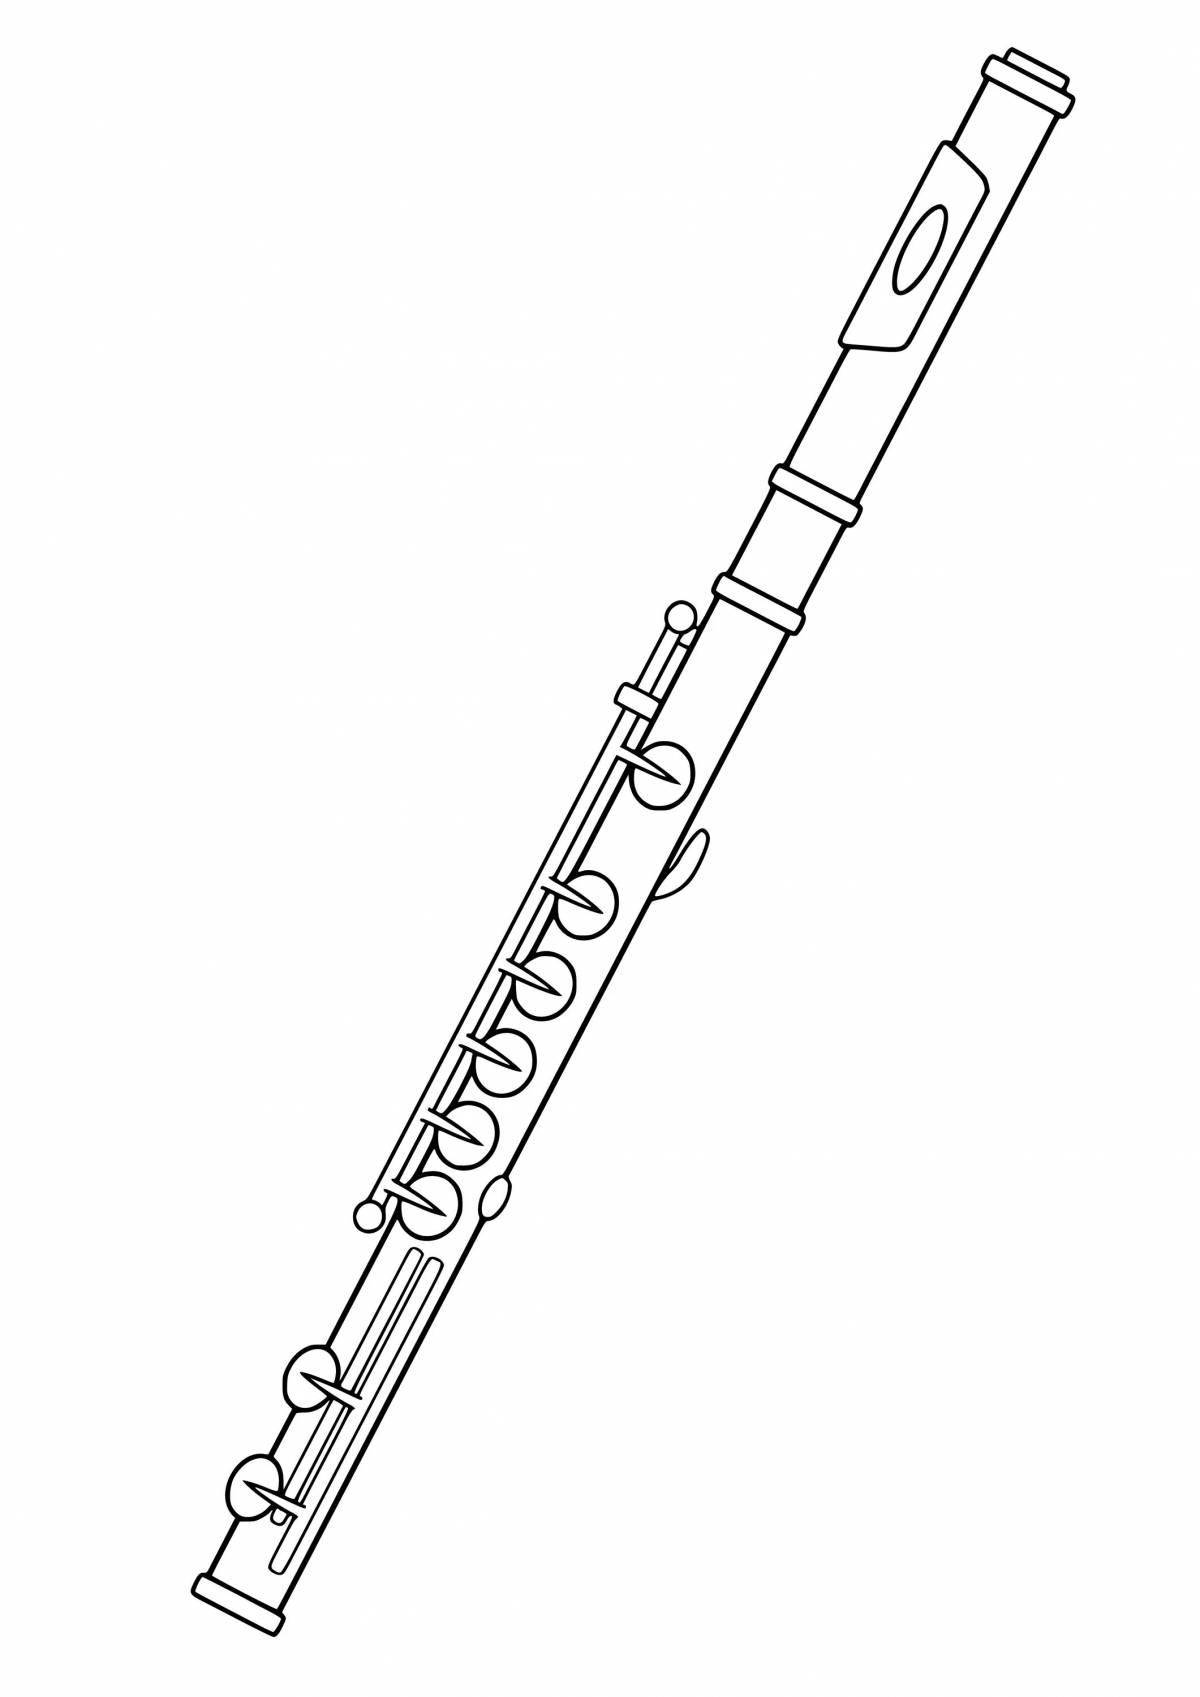 Coloring book cheerful musical instrument flute